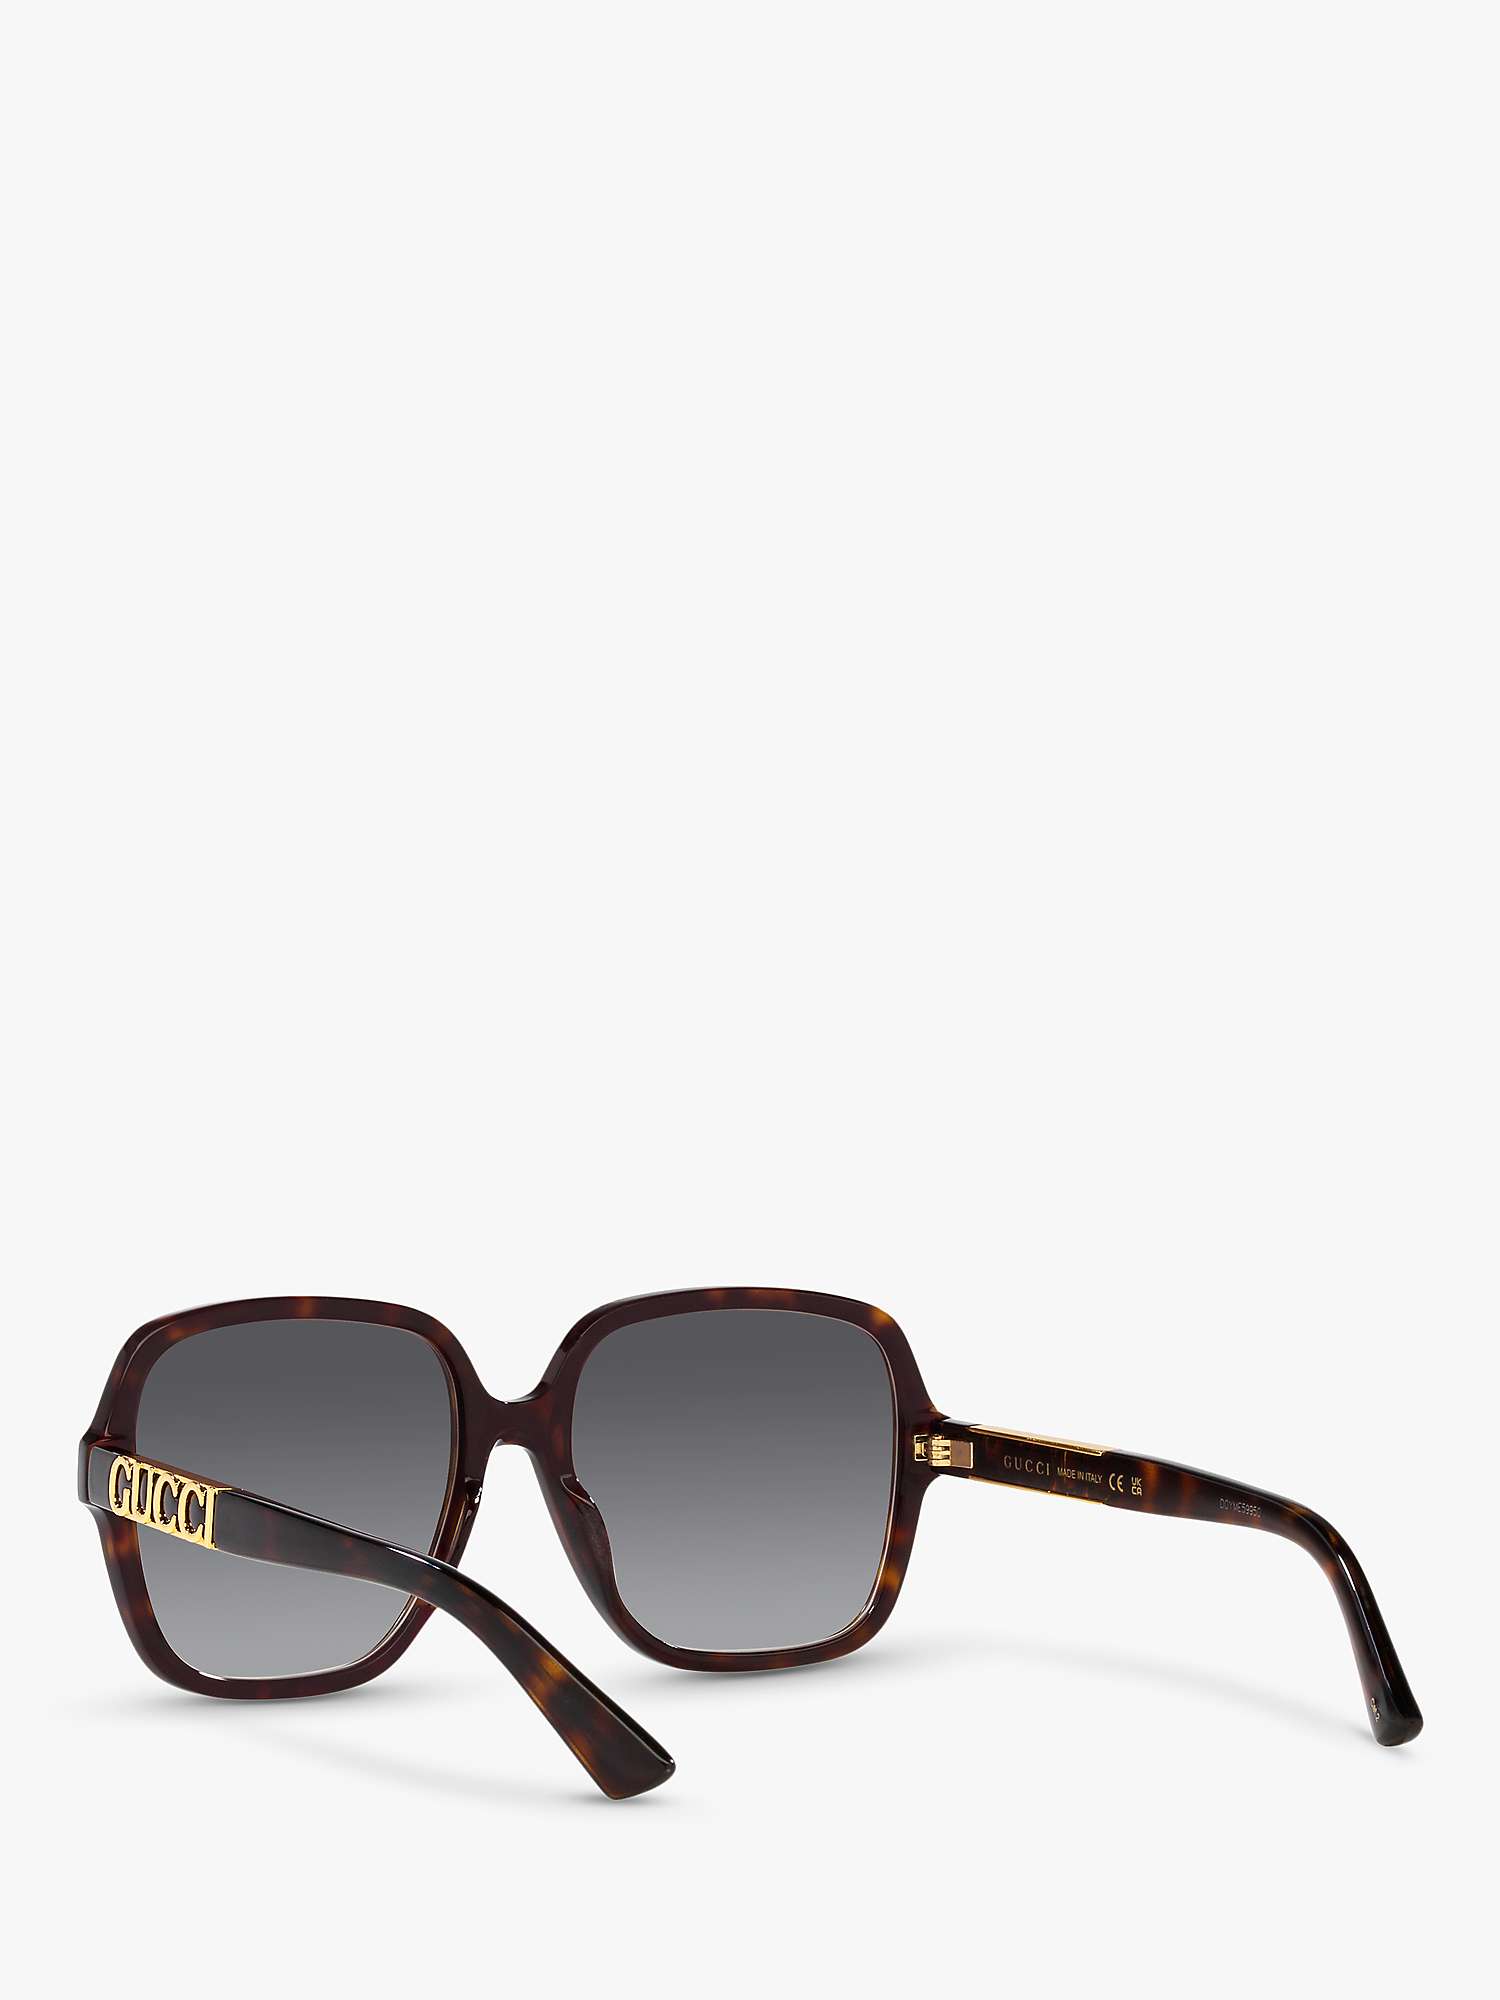 Buy Gucci GG1189S Unisex Square Sunglasses, Brown/Grey Gradient Online at johnlewis.com